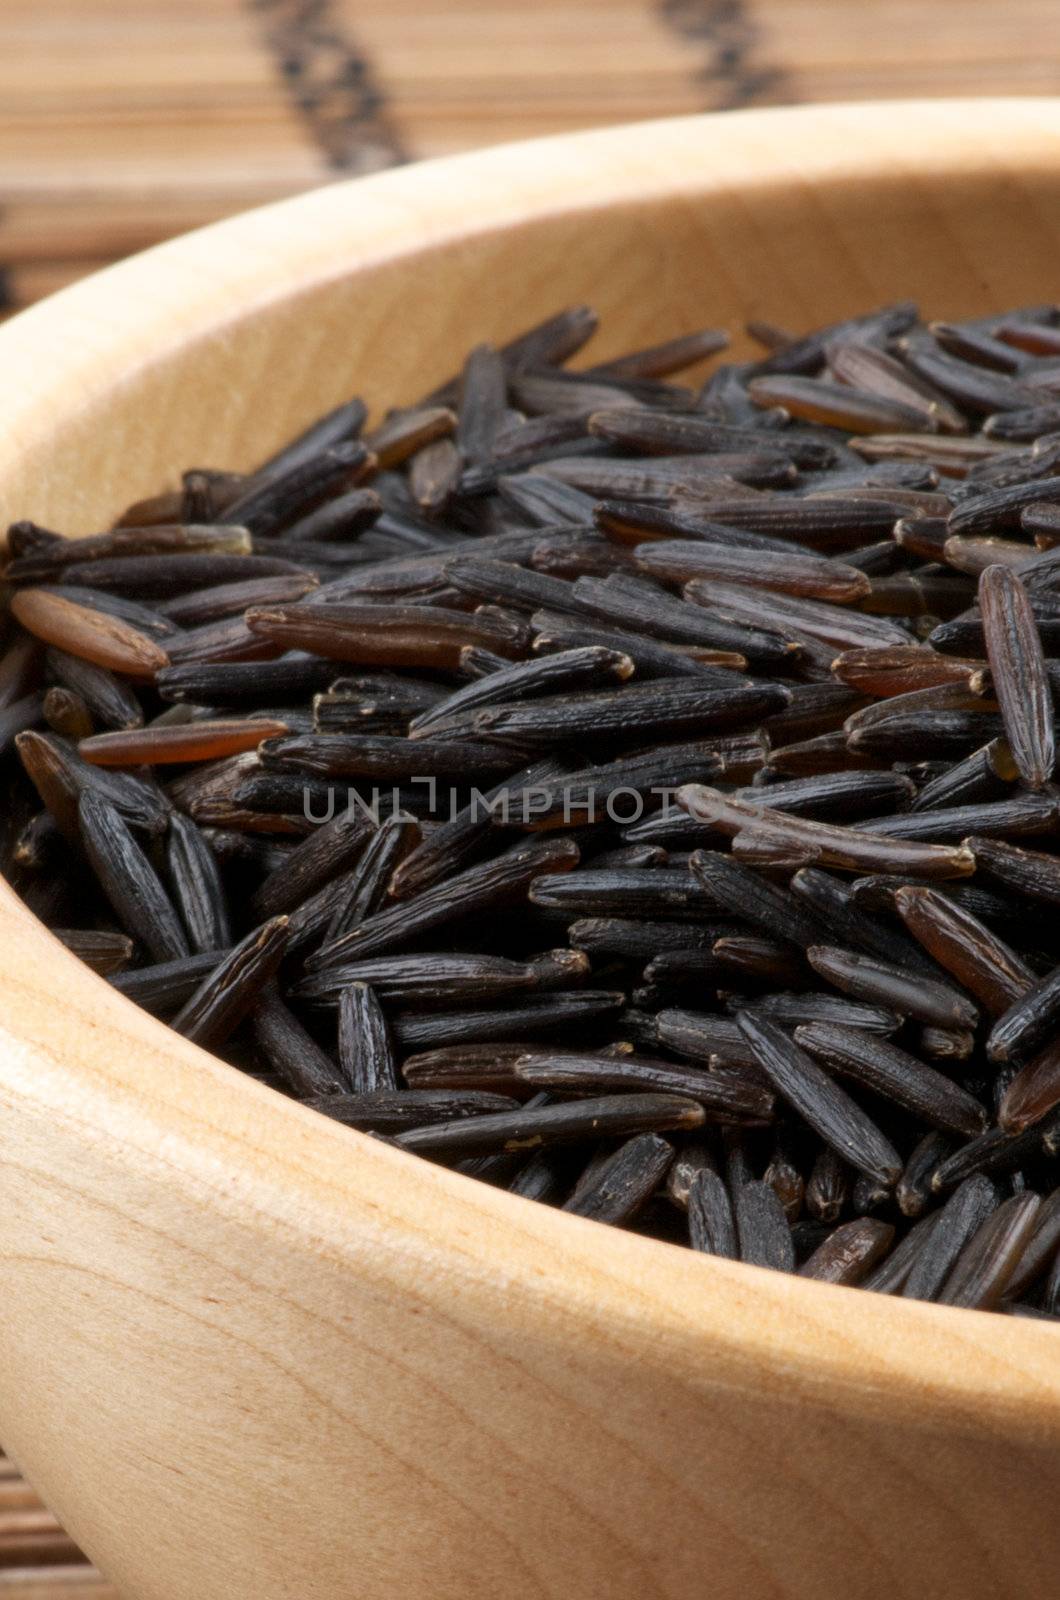 Wood Bowl with Perfect Wild Brown Rice closeup on Straw mat background